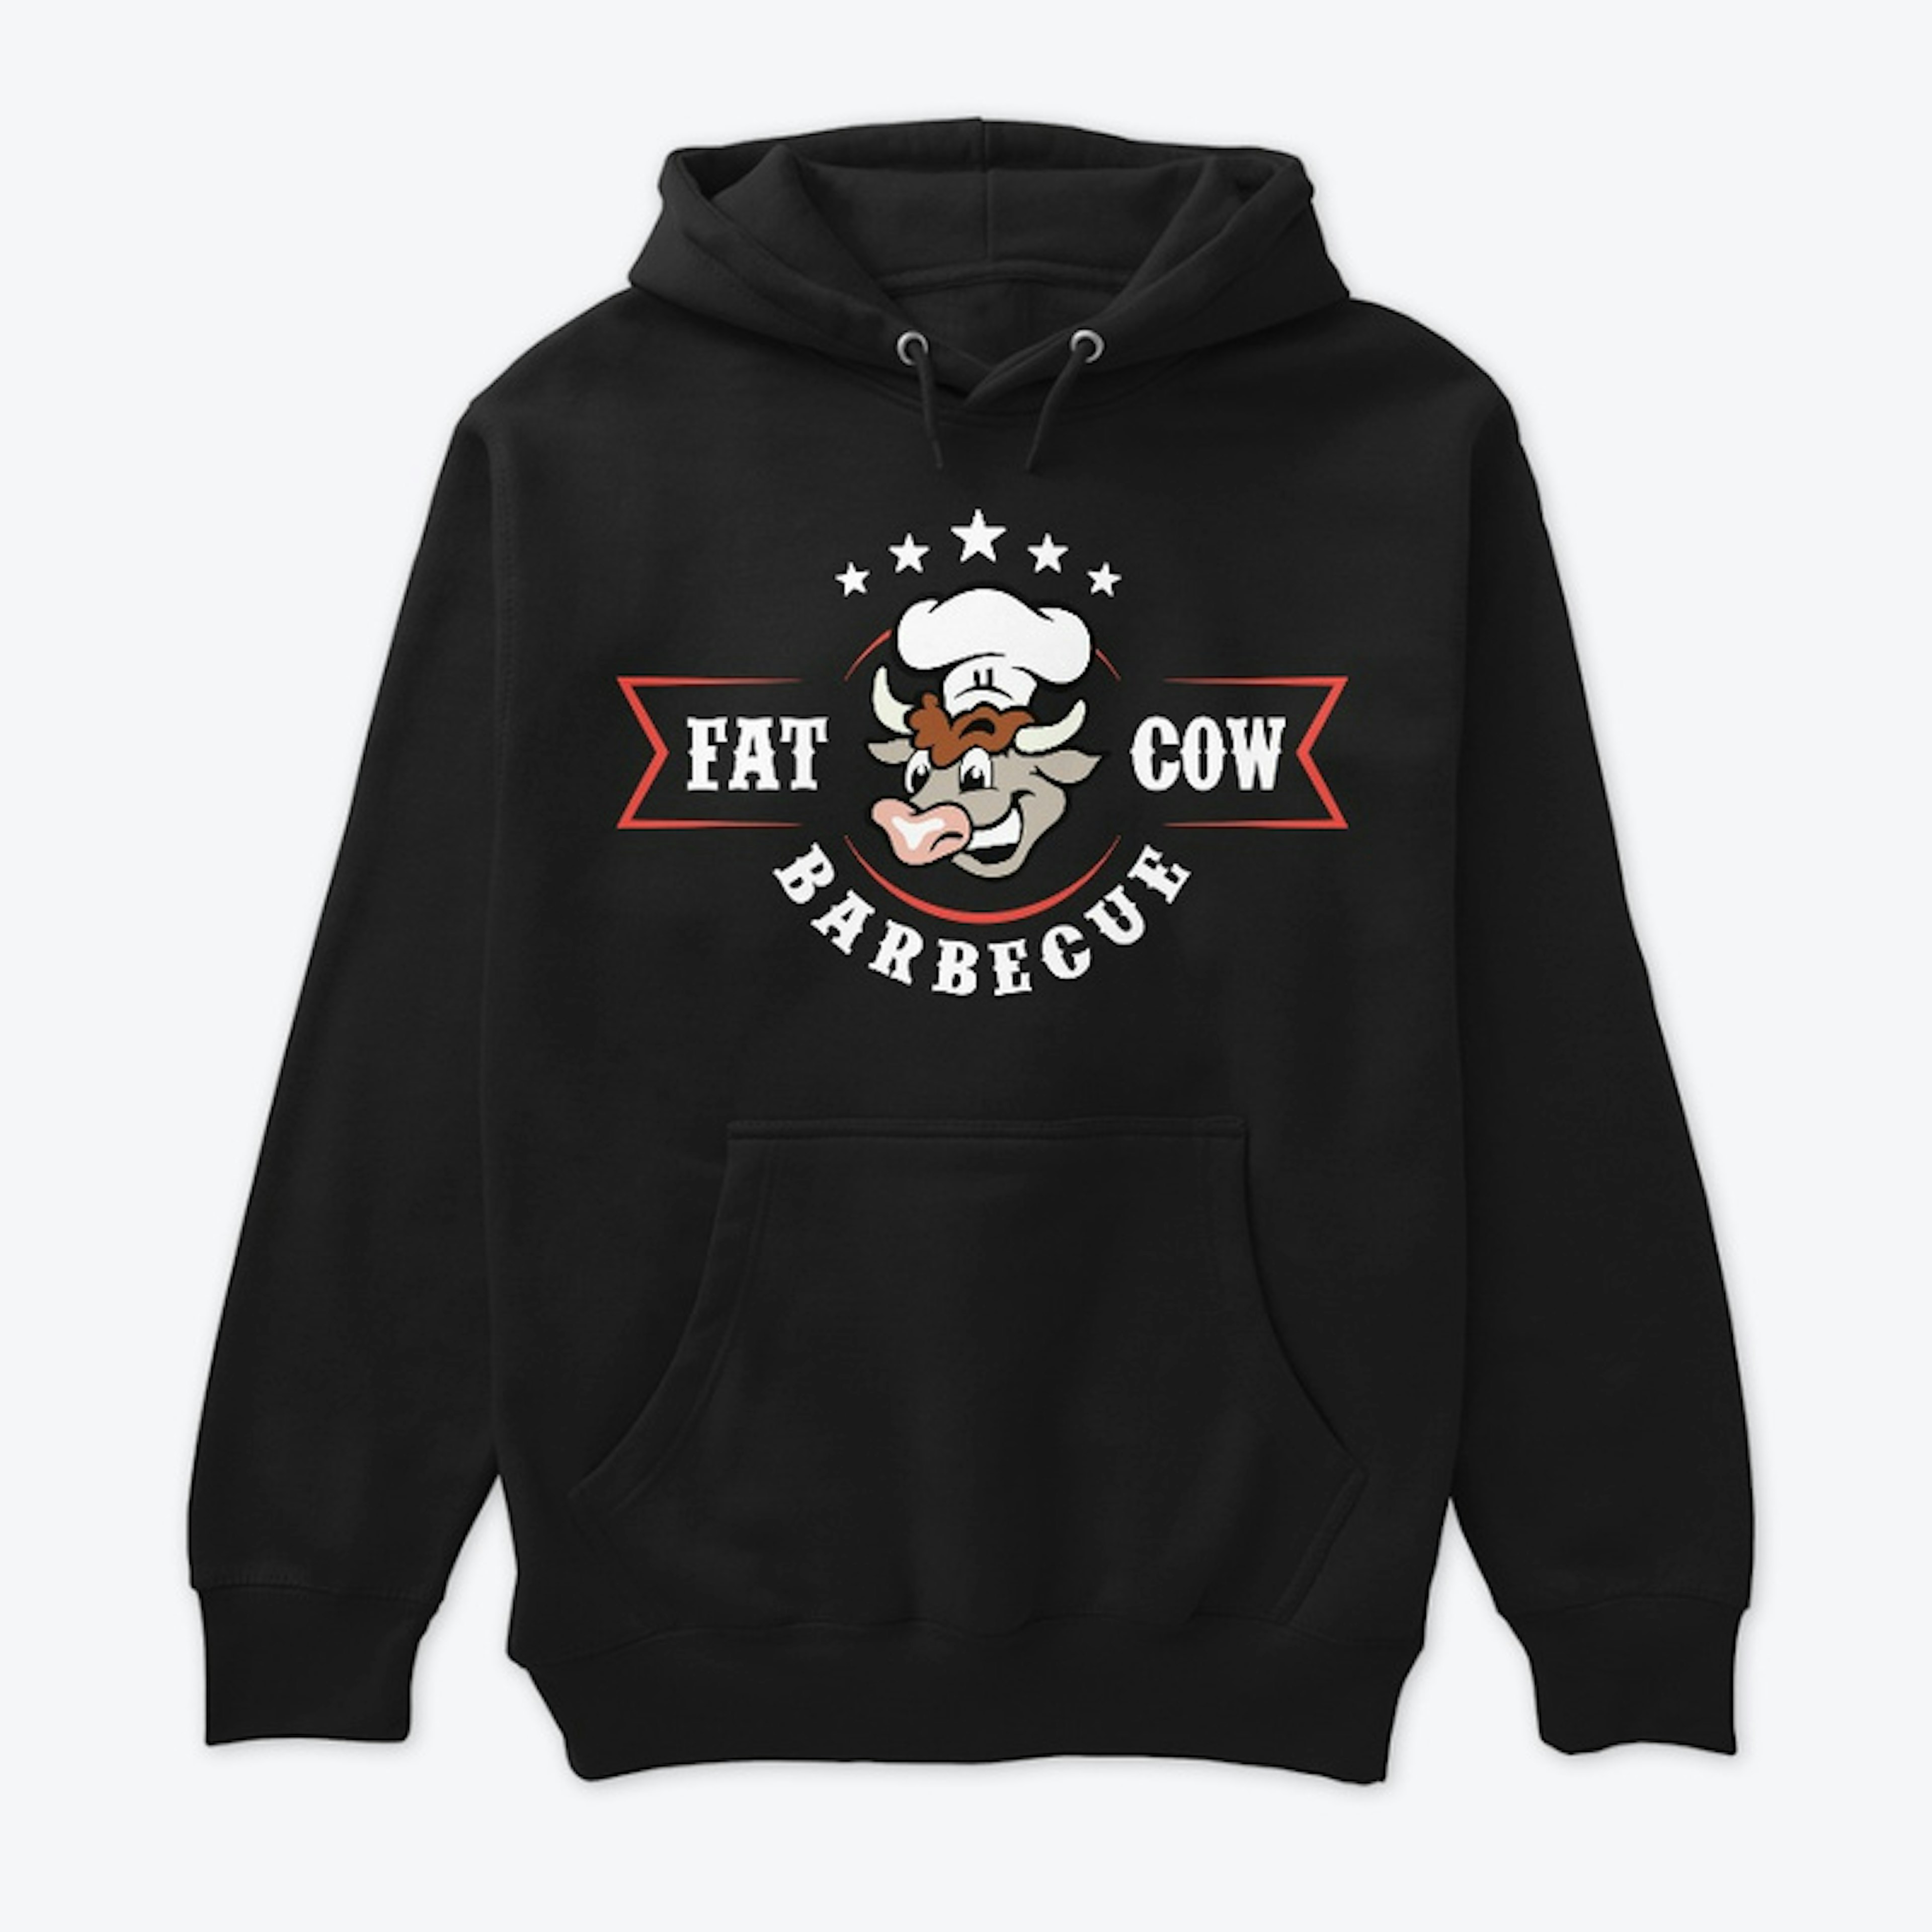 Fat Cow Barbecue Pullover Hoodie